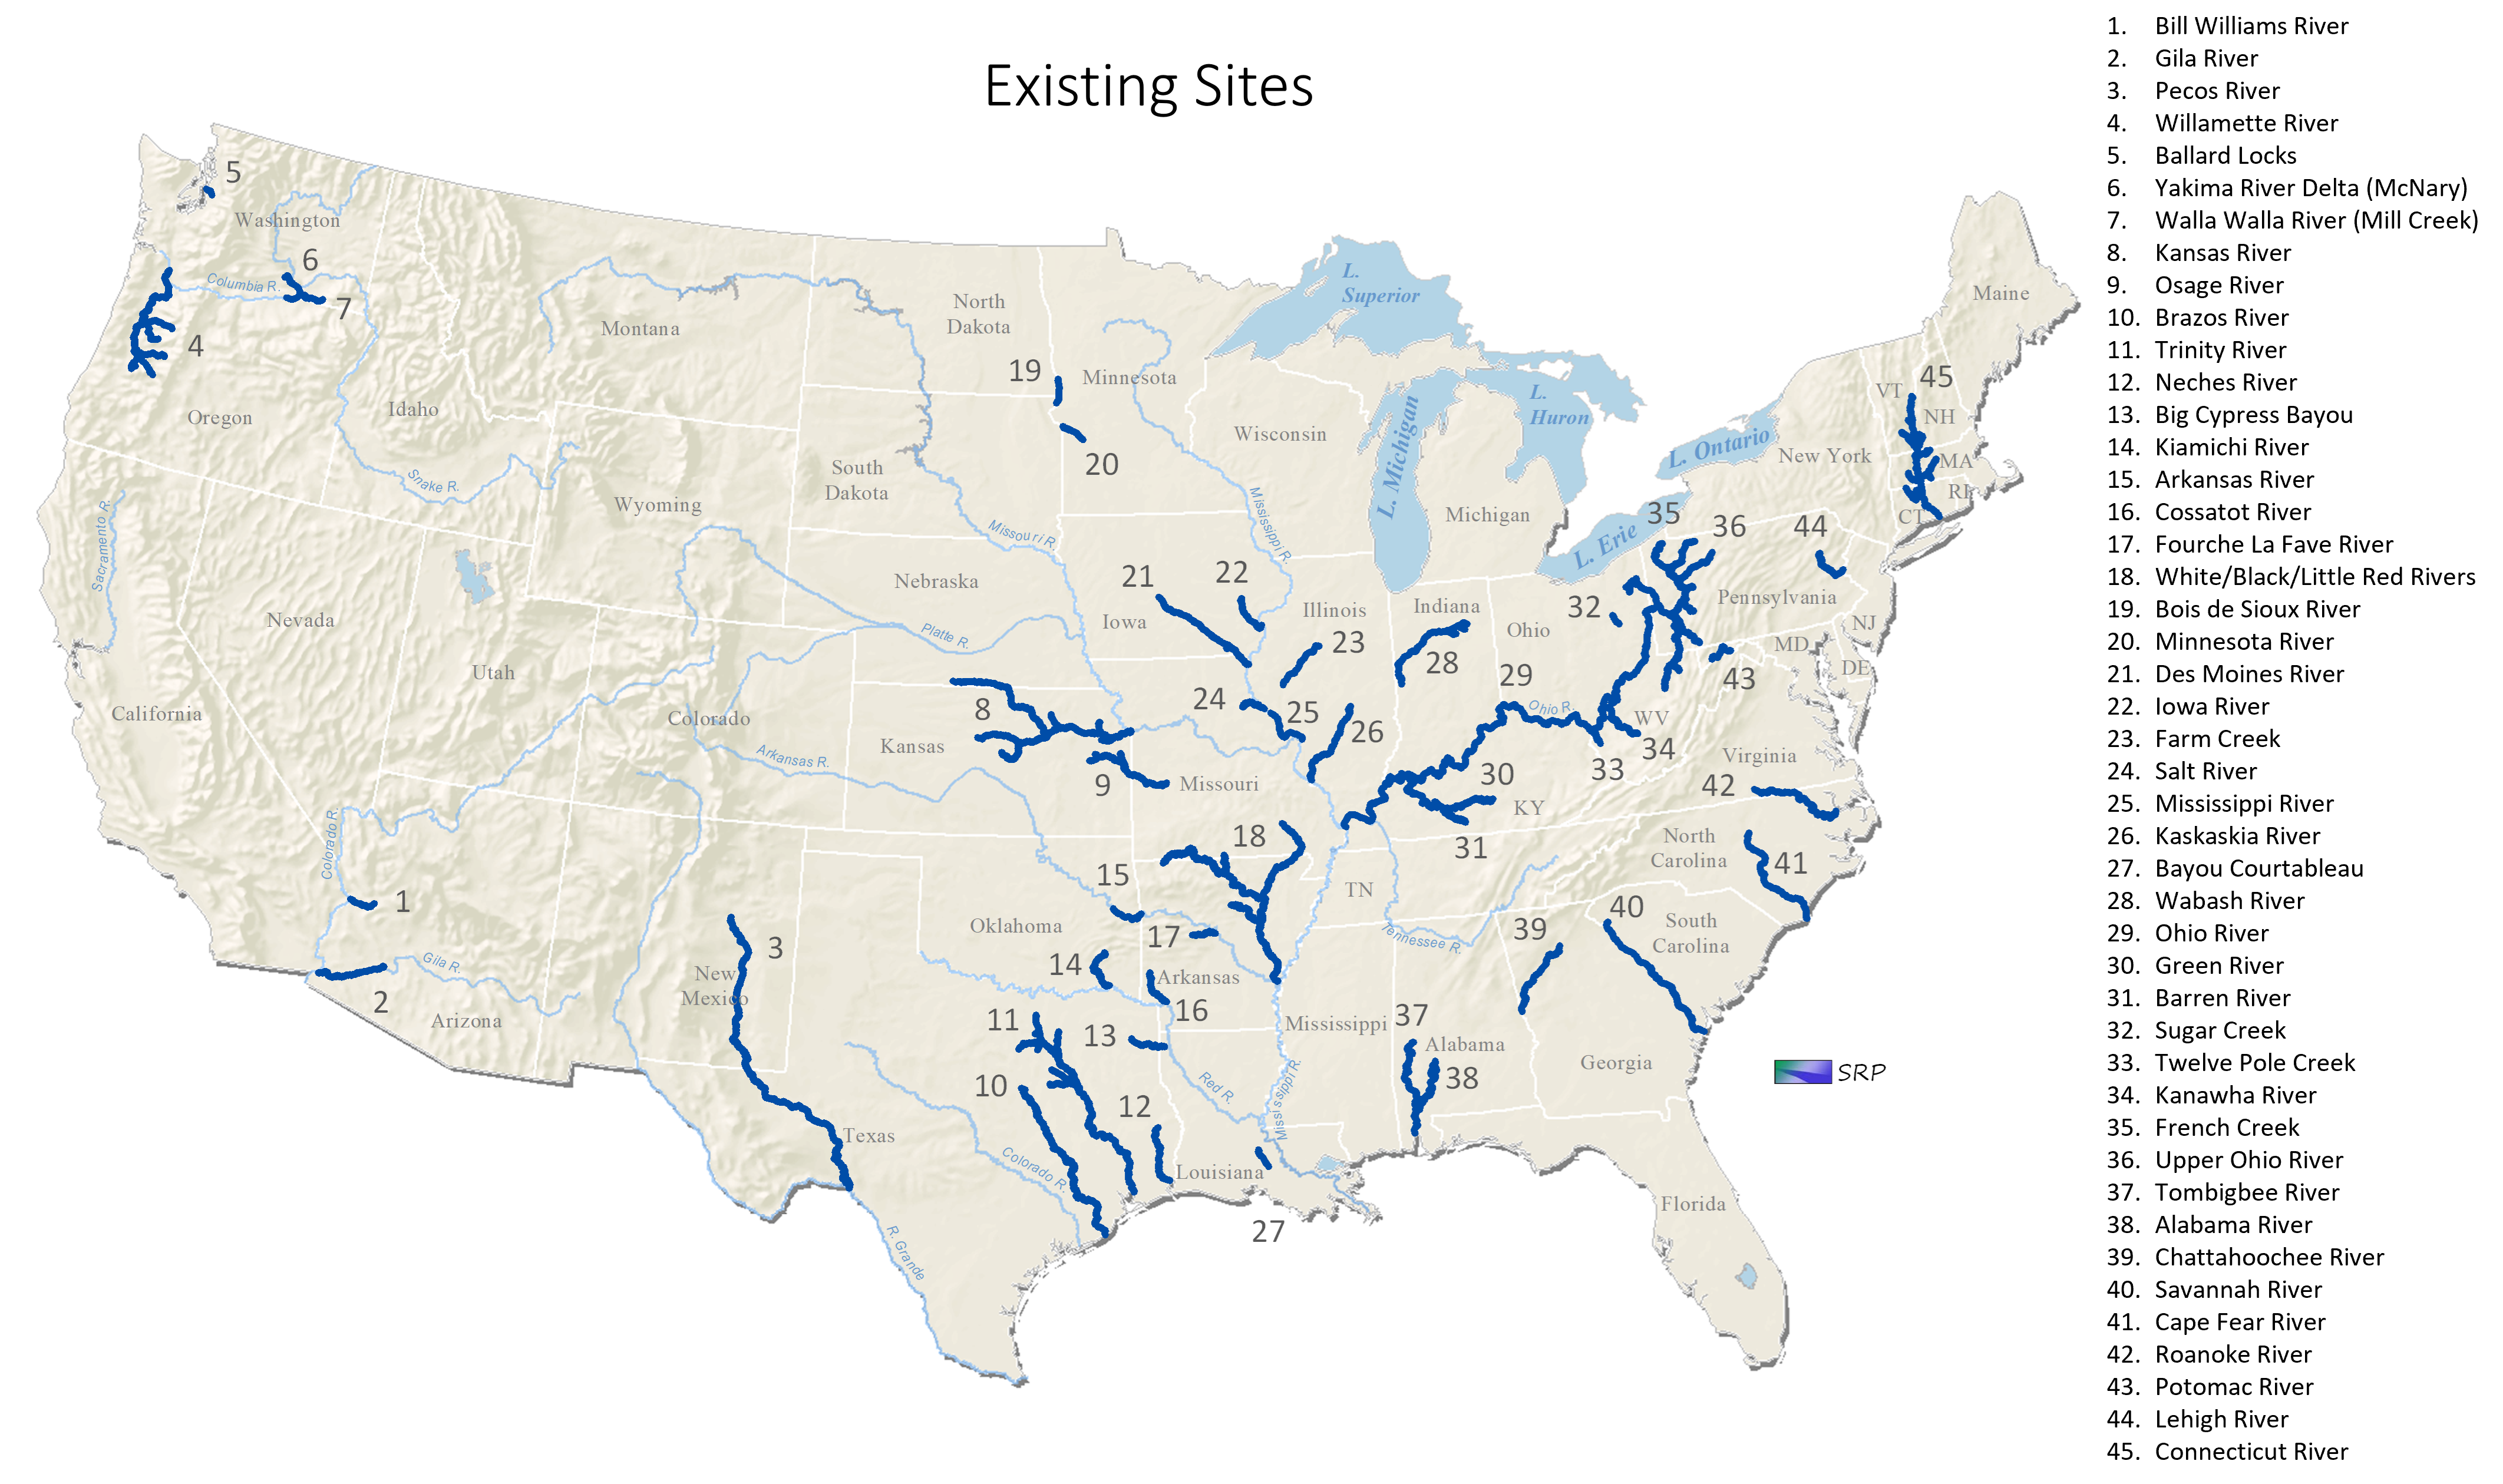 Sustainable Rivers is an ongoing national program to increase environmental benefits provided by Corps already built water resources projects. Sustainable Rivers involves work on Corps infrastructure in more than 40 river systems and 12,000 river miles.